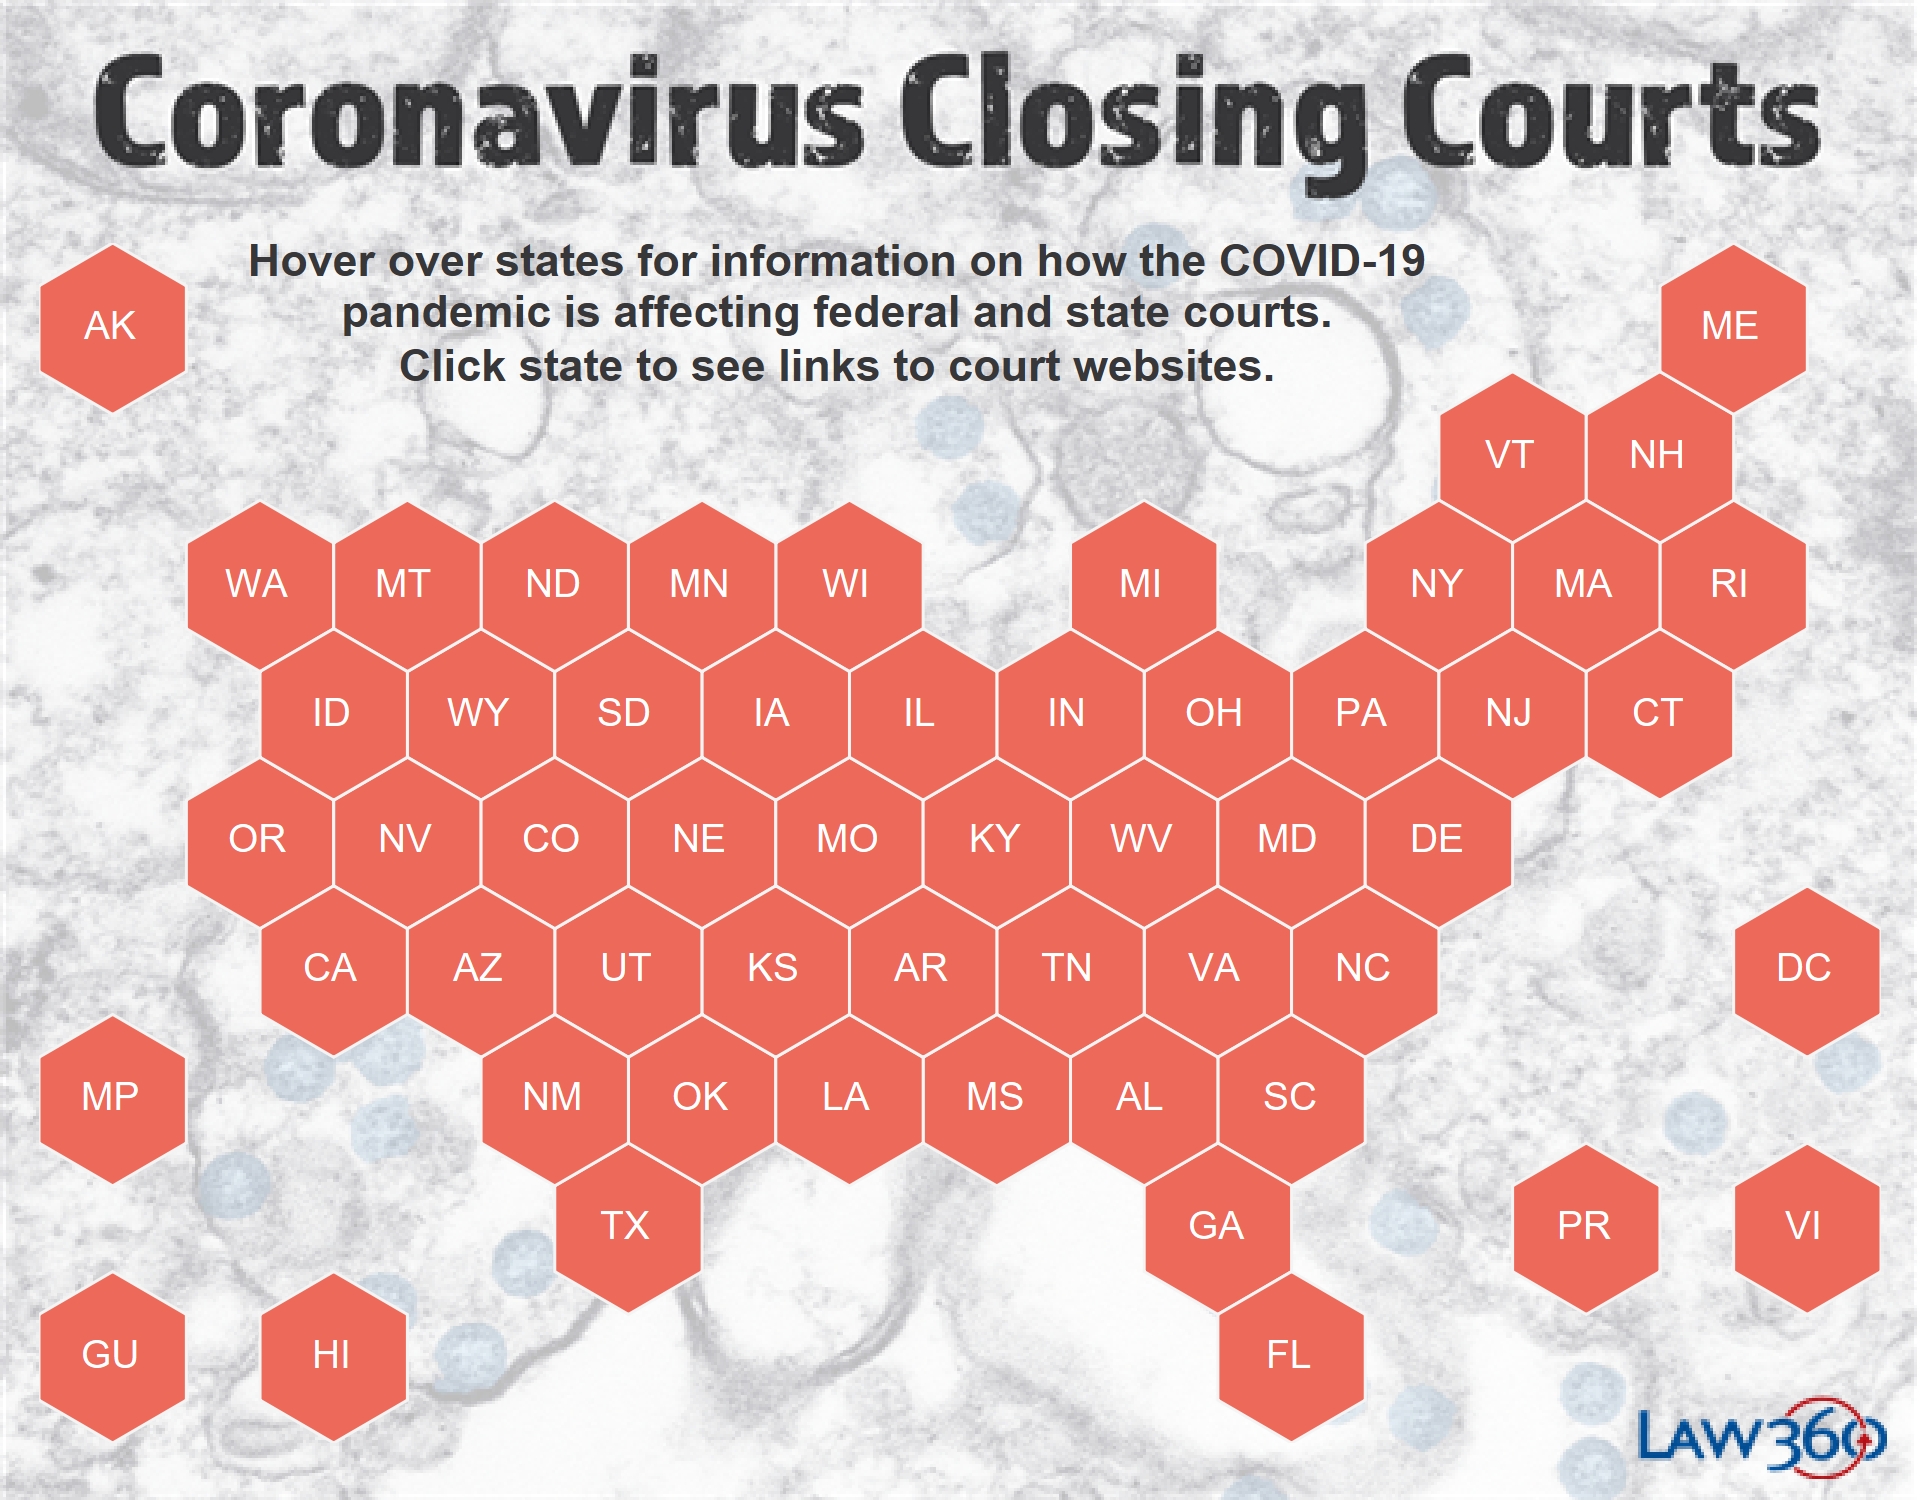 Coronavirus: The Latest Court Closures And Restrictions - Law360